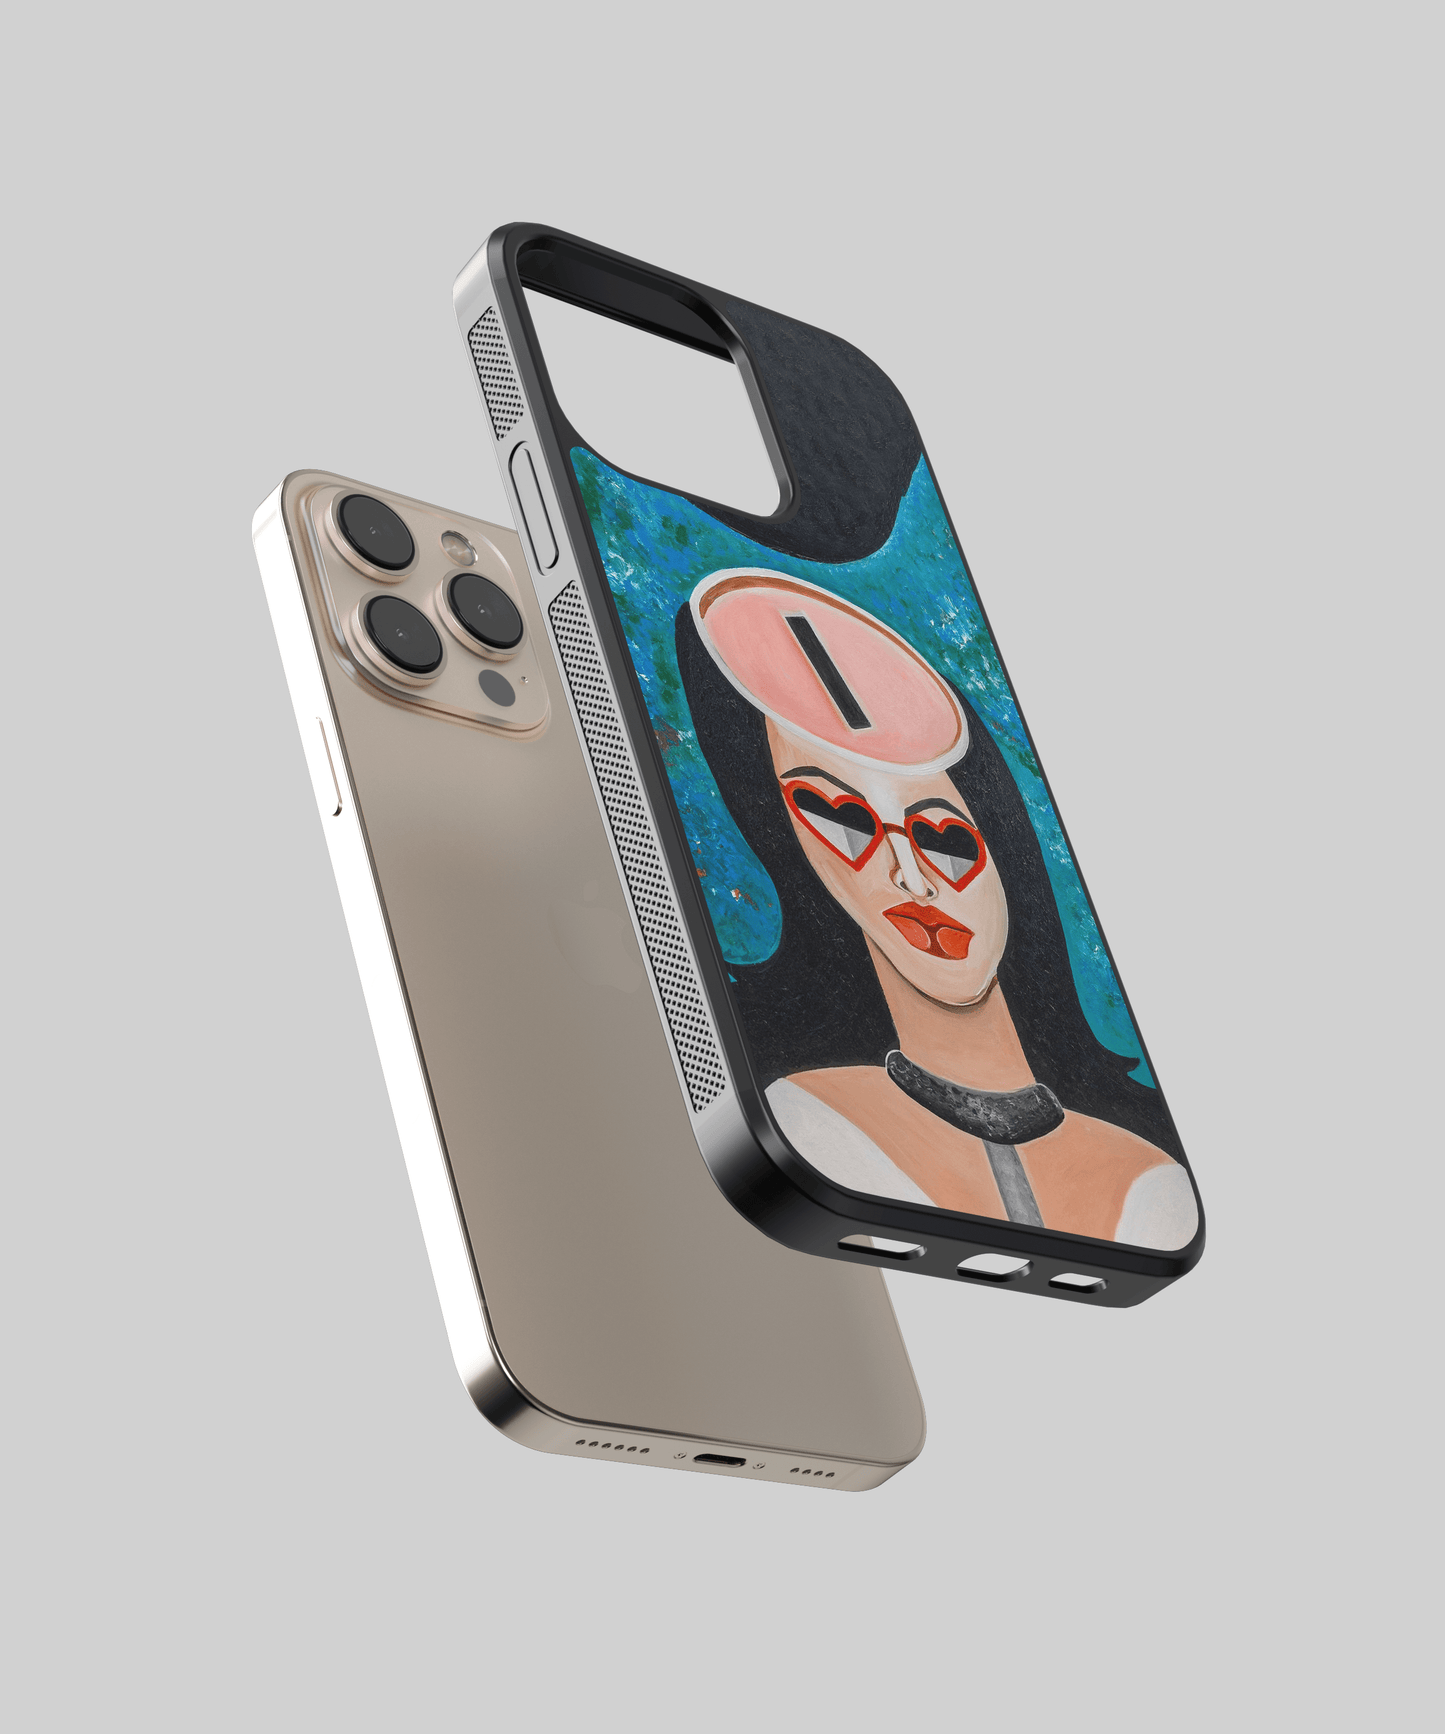 Materialiste - Huawei P30 Pro phone case